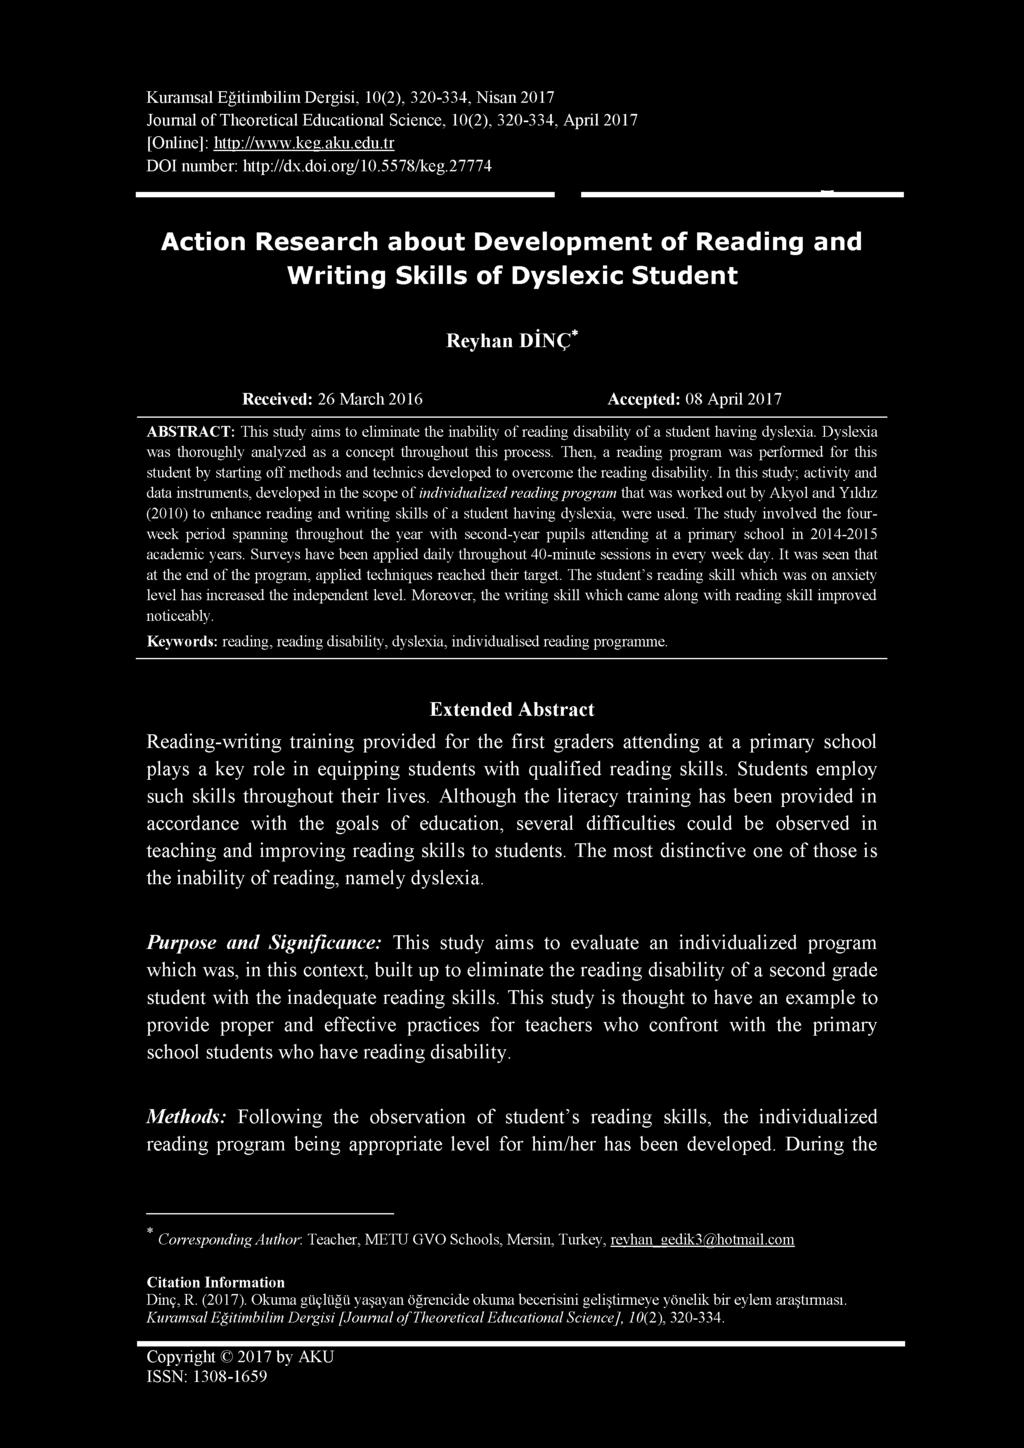 27774 Action Research about Development of Reading and Writing Skills of Dyslexic Student Reyhan DİNÇ* Received: 26 March 2016 Accepted: 08 April 2017 ABSTRACT: This study aims to eliminate the